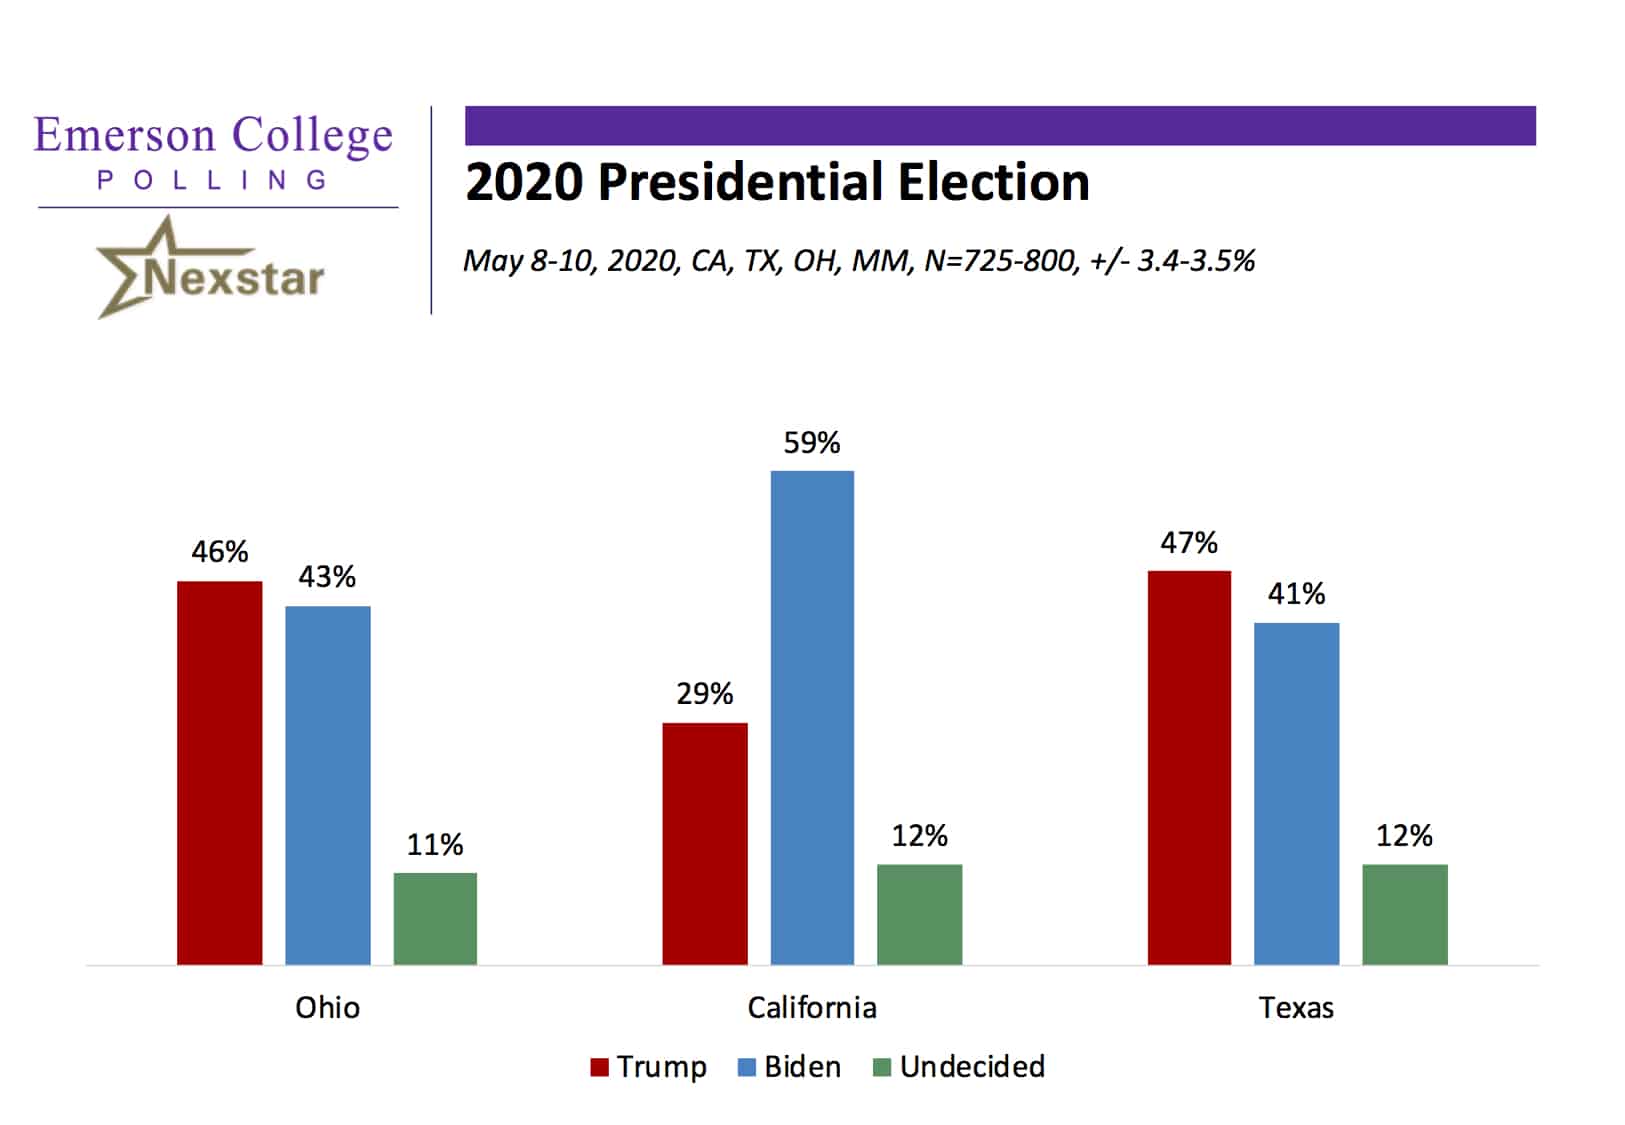 Ohio, Texas, and California 2020: Trump with Narrow Leads in Ohio and Texas, but has Widespread Expectation of Being Re-elected